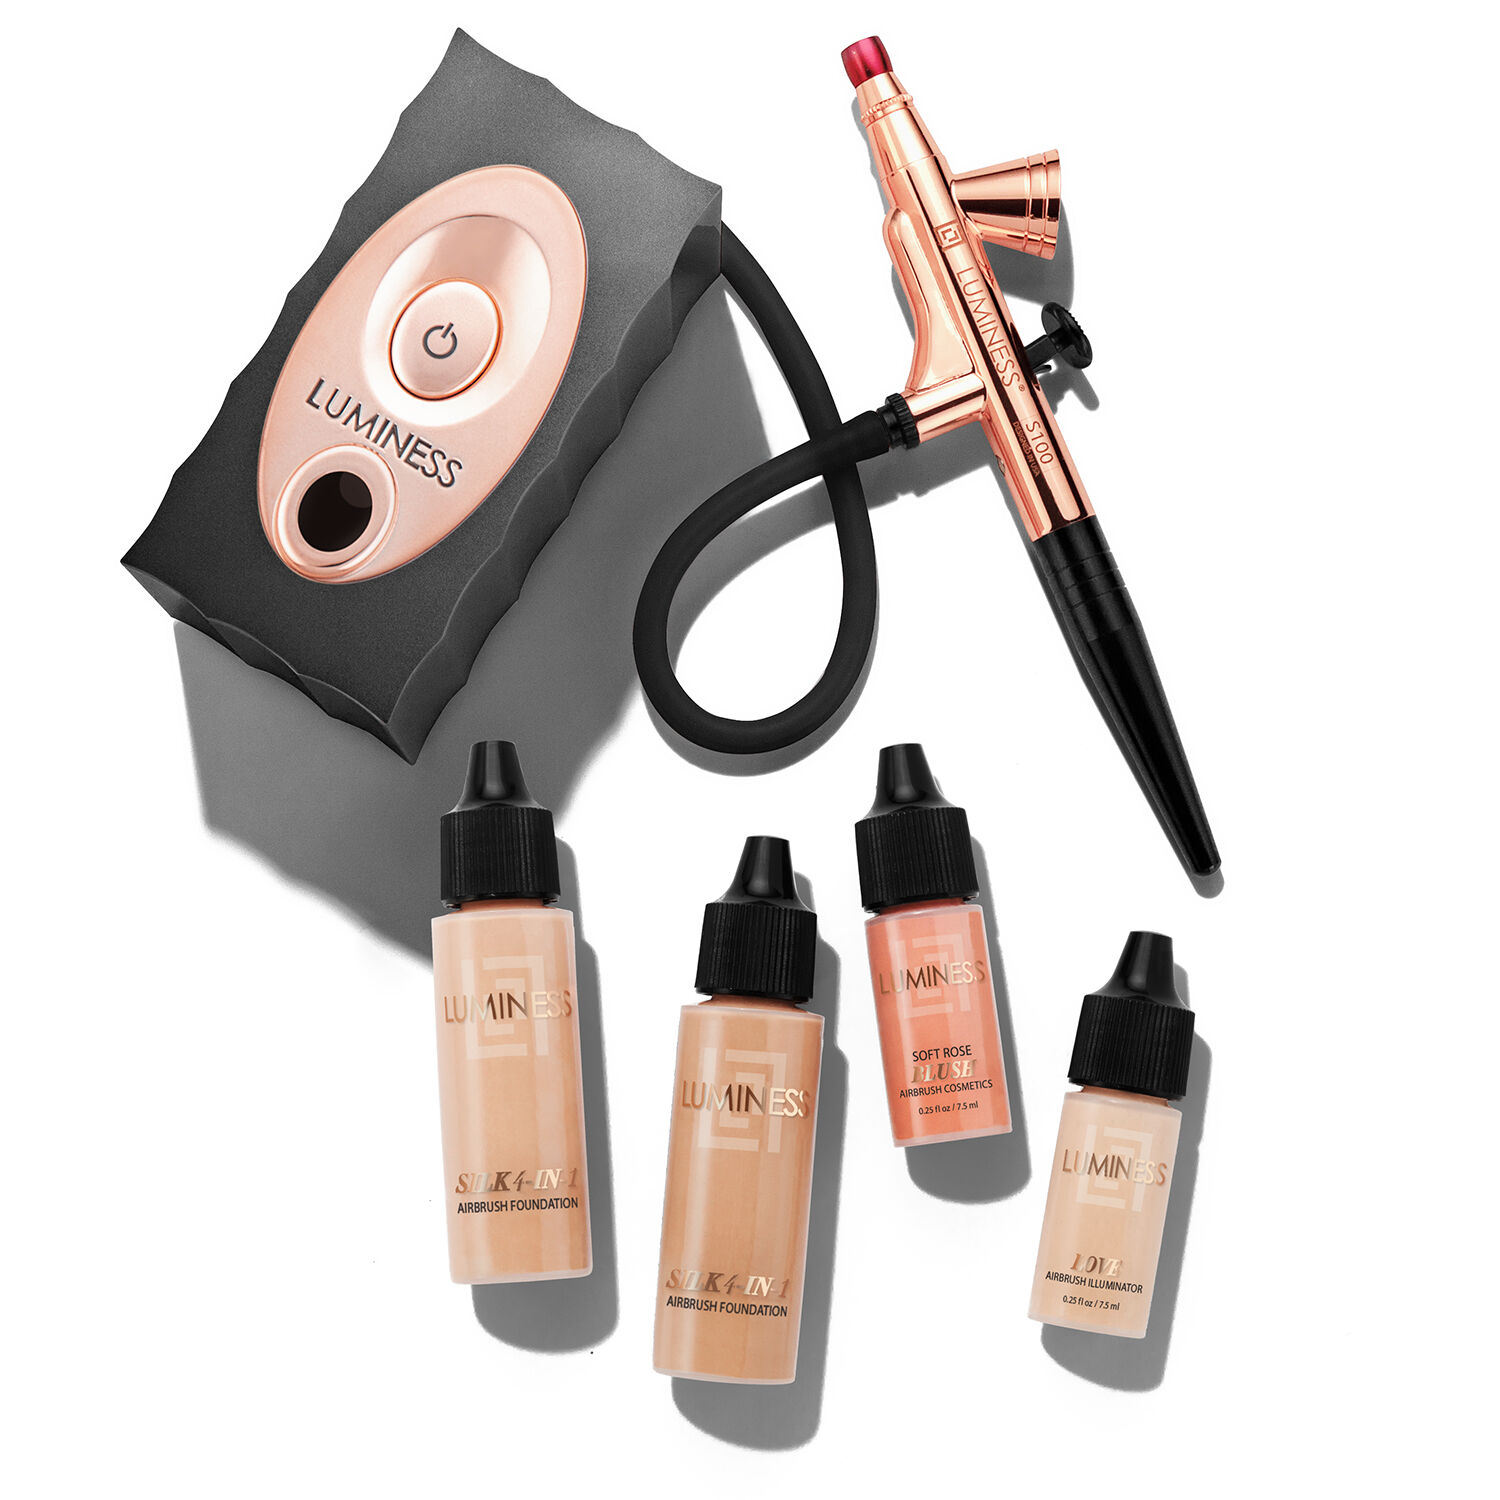 Glam Air Airbrush Makeup Machine System with 5 Tan Sattin Shades of  Foundation and Airbrush Blush light 